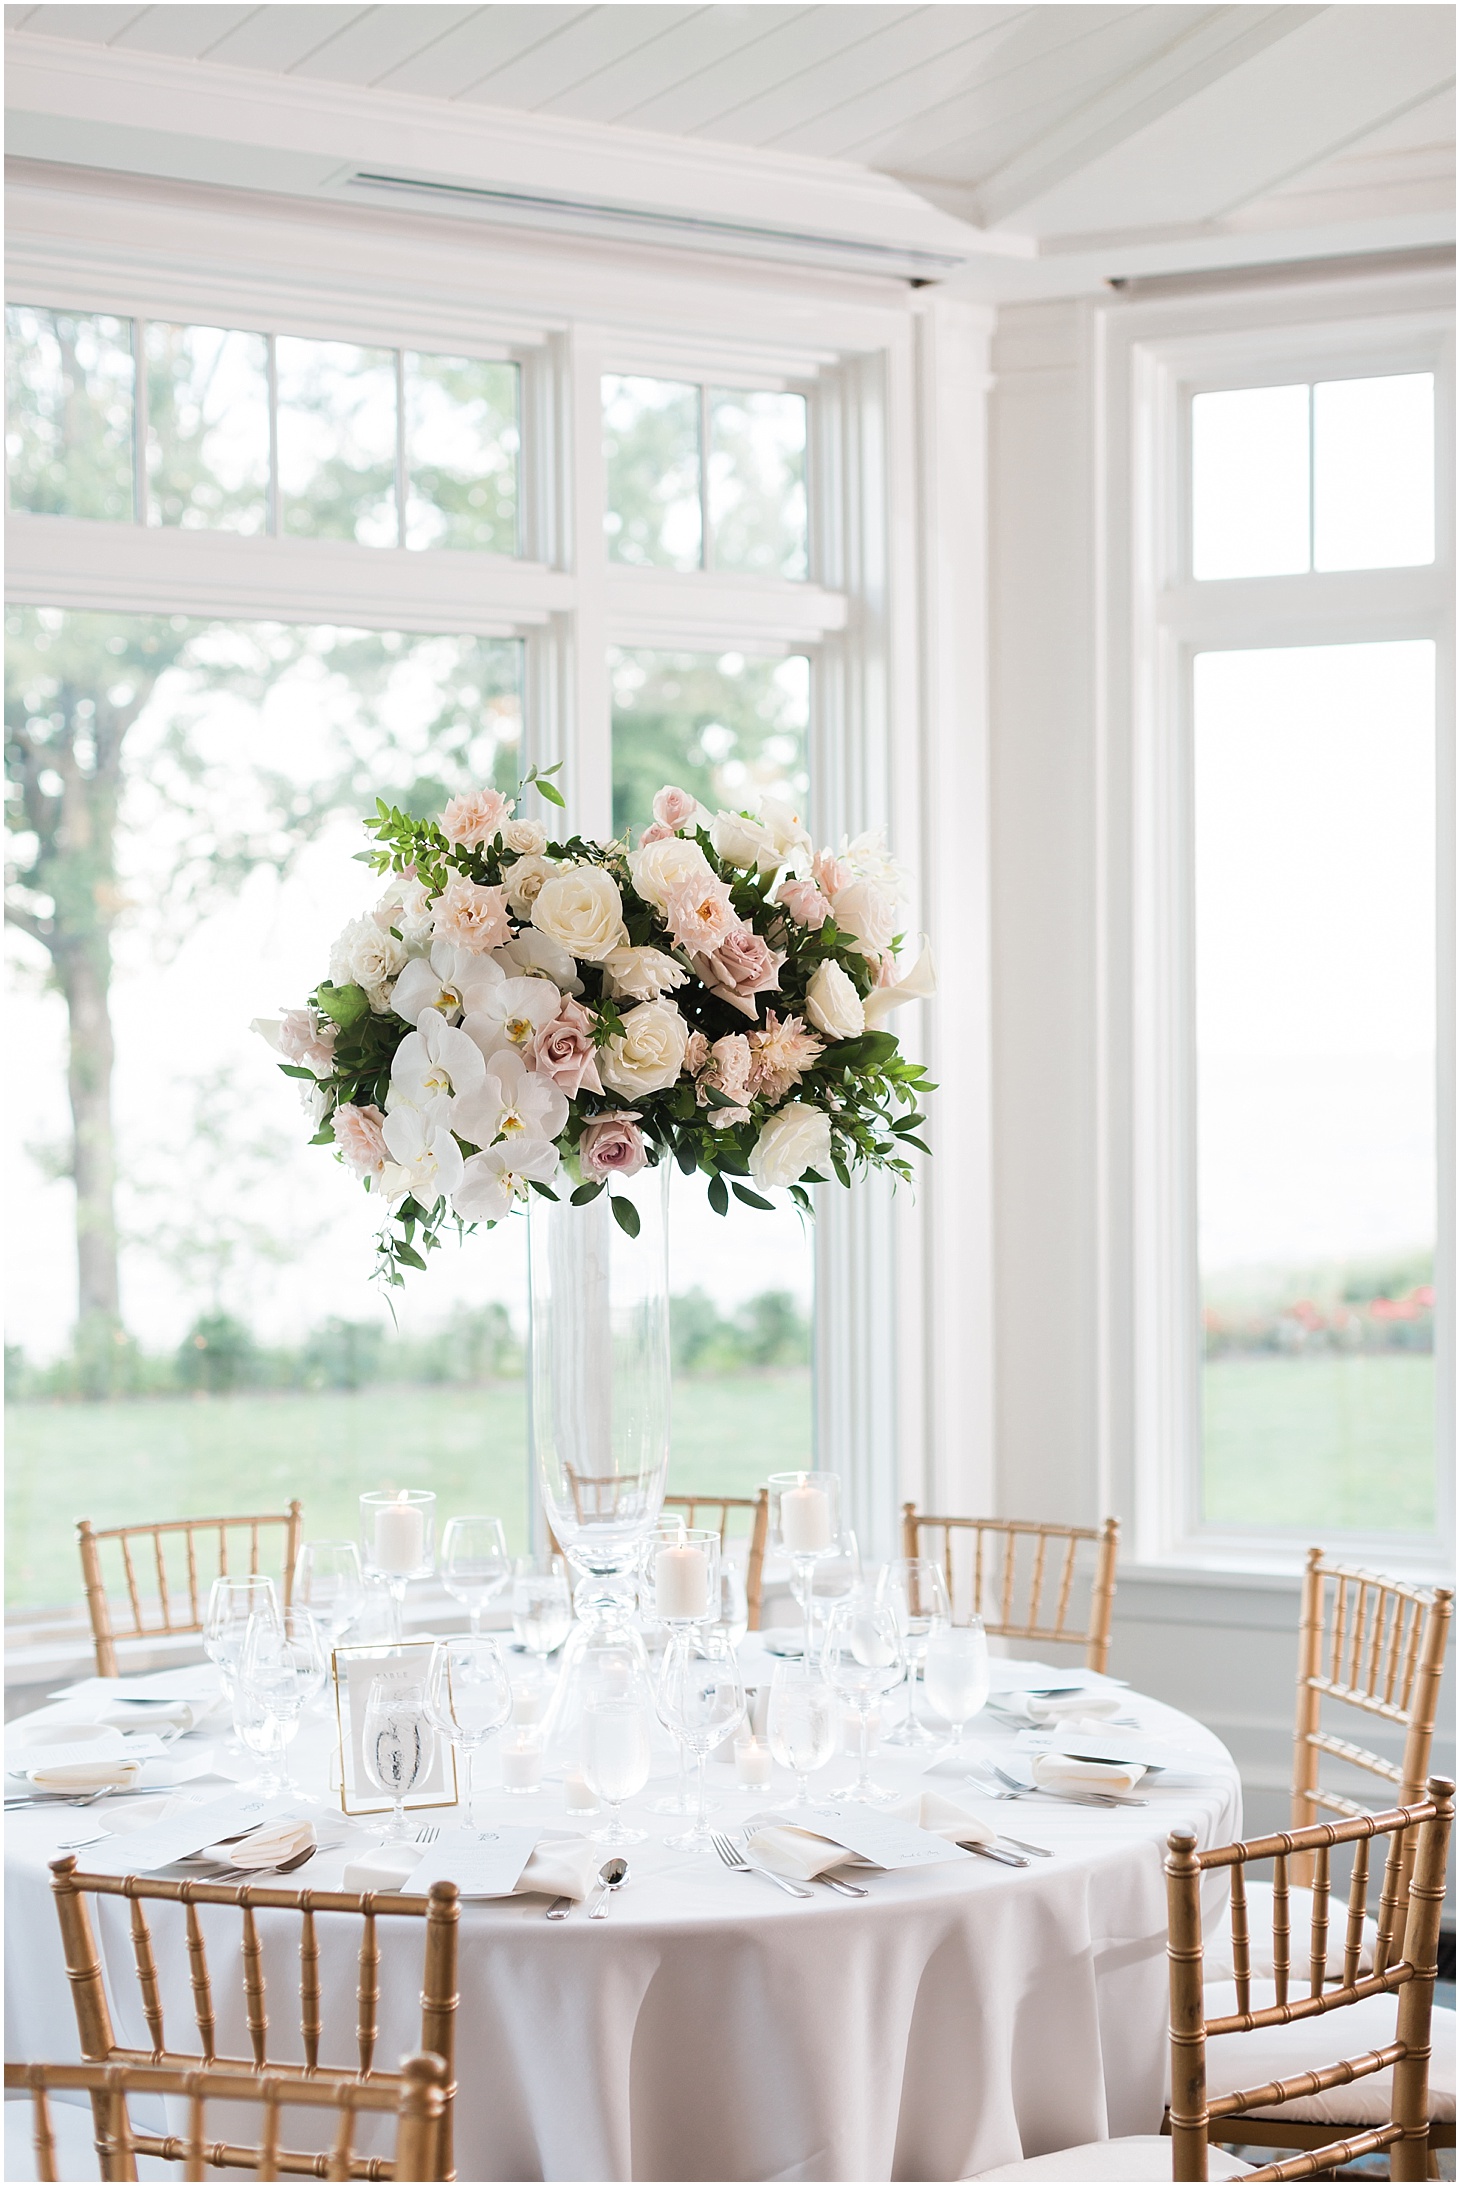 Gibson Island Club Wedding Reception in Annapolis, MD | Southern Magnolia Wedding at the Naval Academy and Gibson Island Club | Sarah Bradshaw Photography